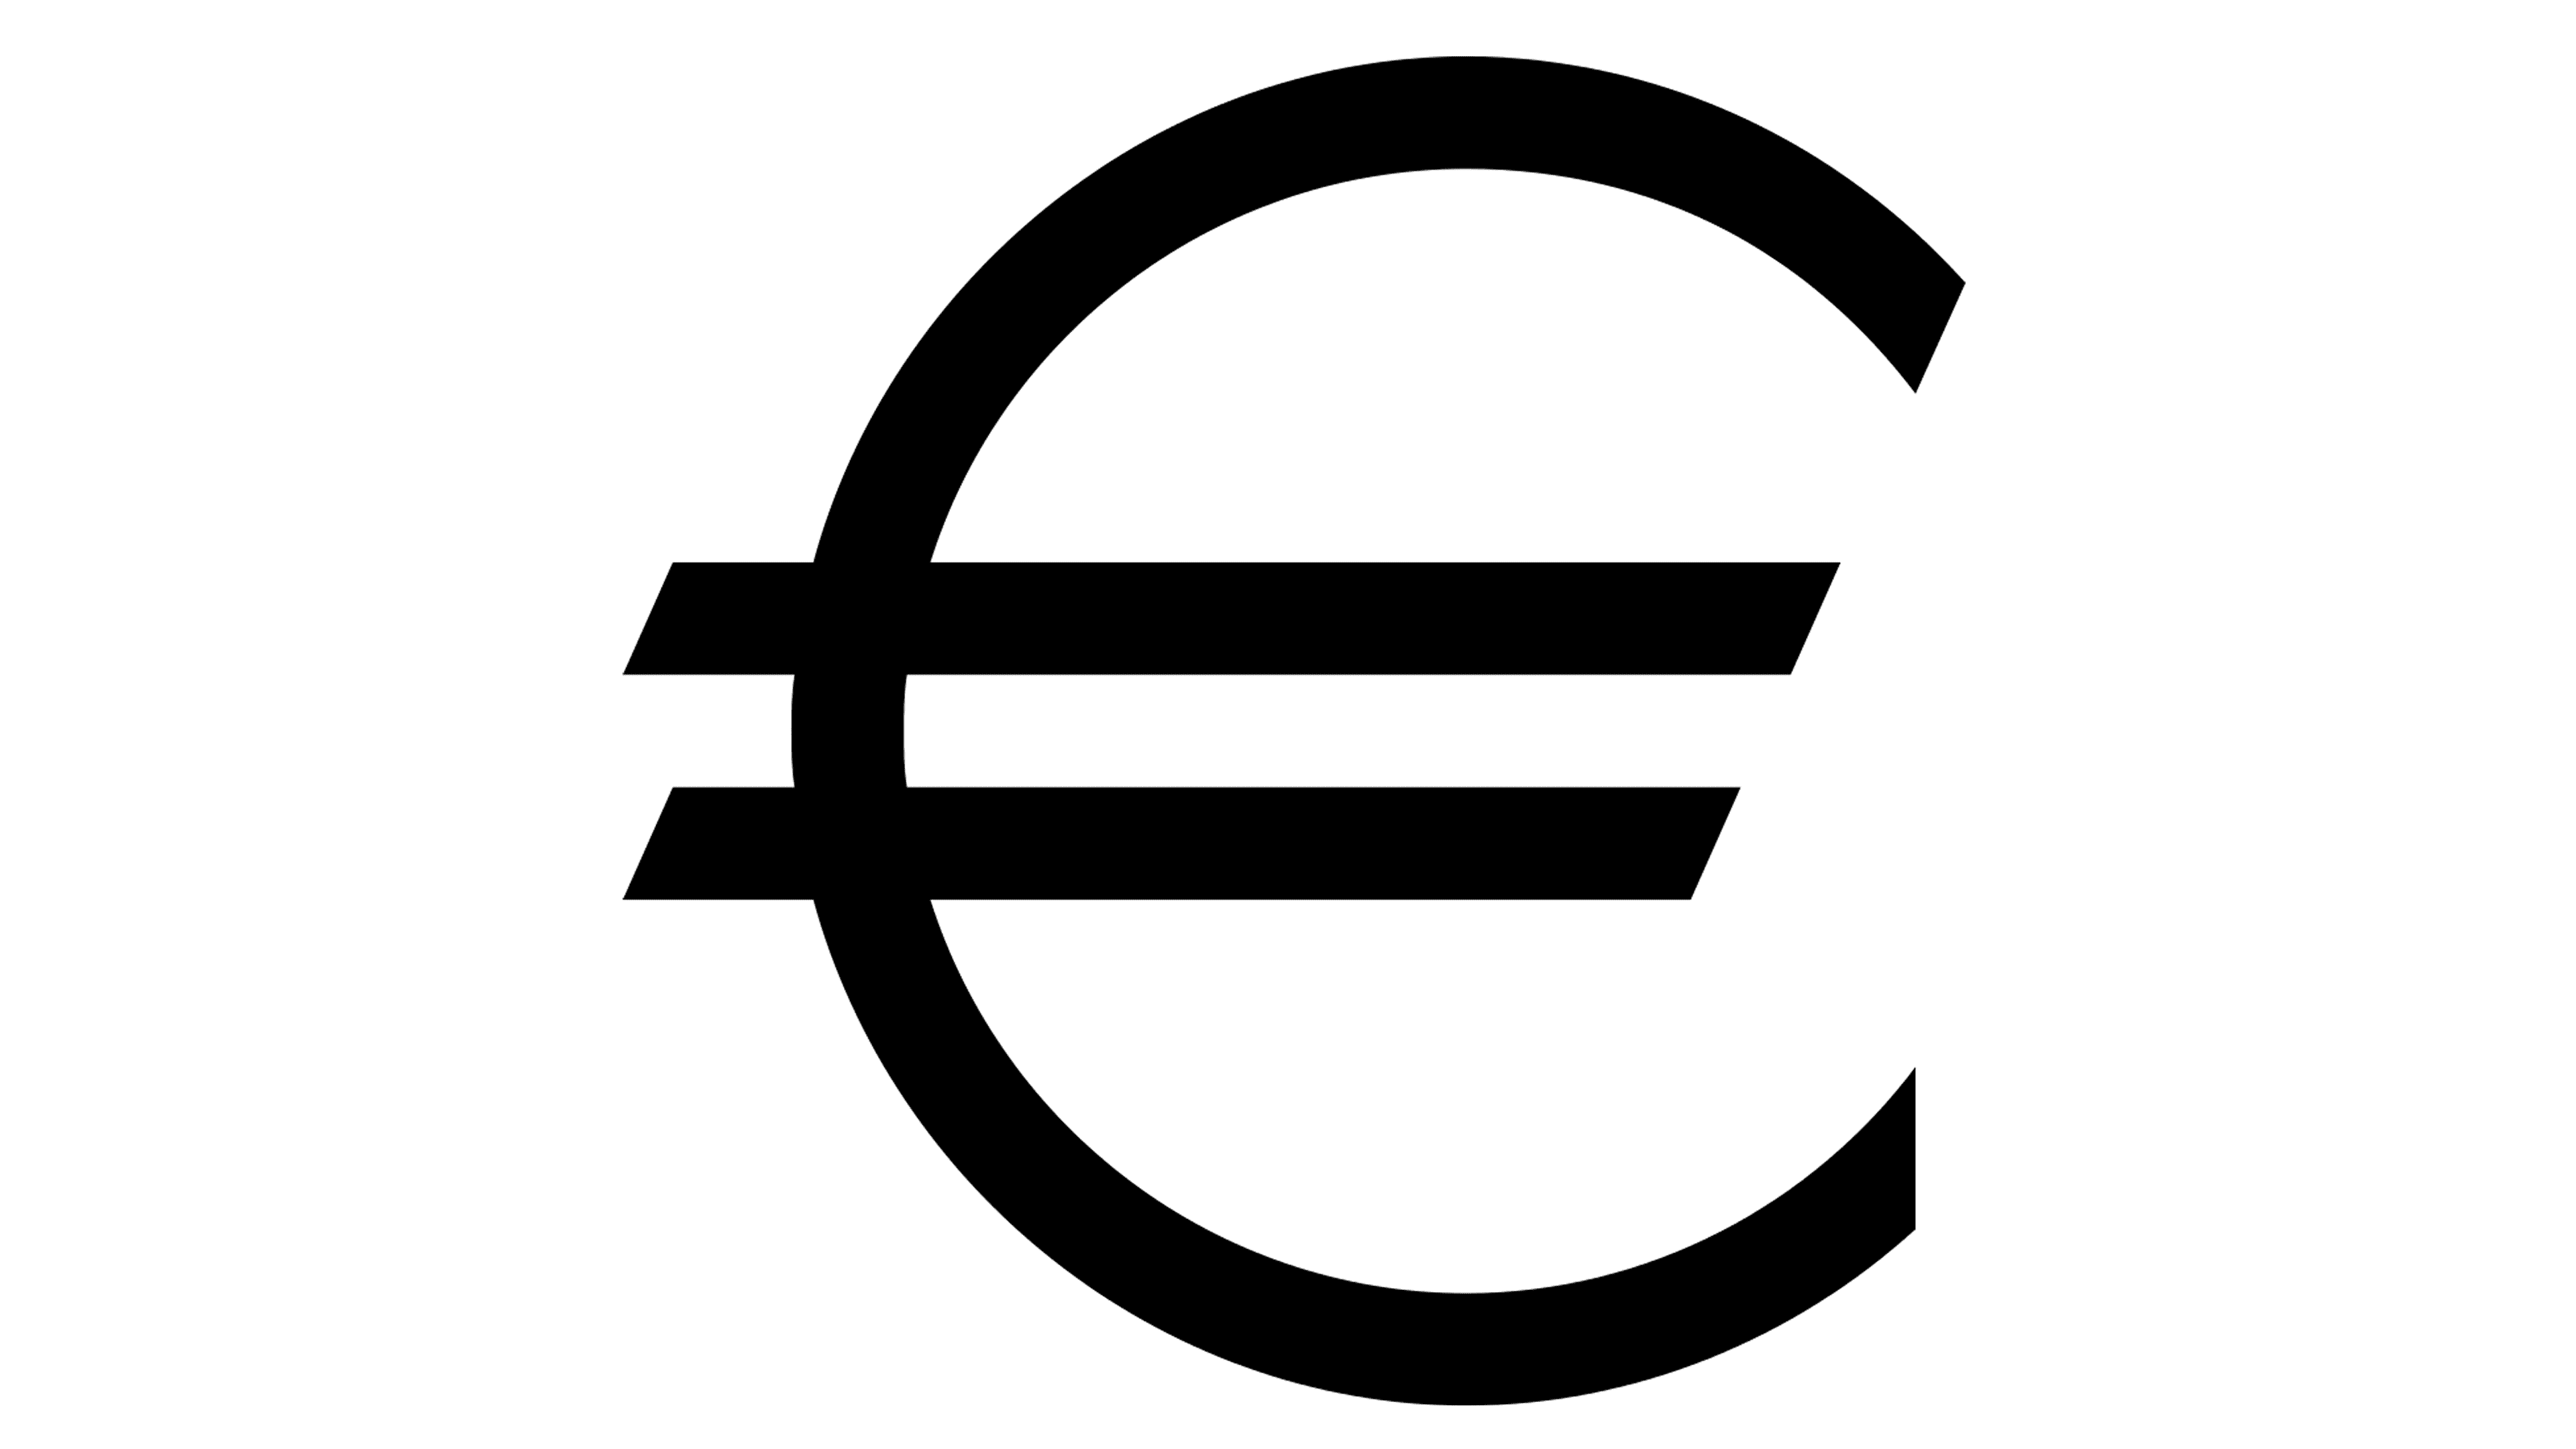 5 Euro Note, euro Banknotes, money, symbols, Euro sign, Currency